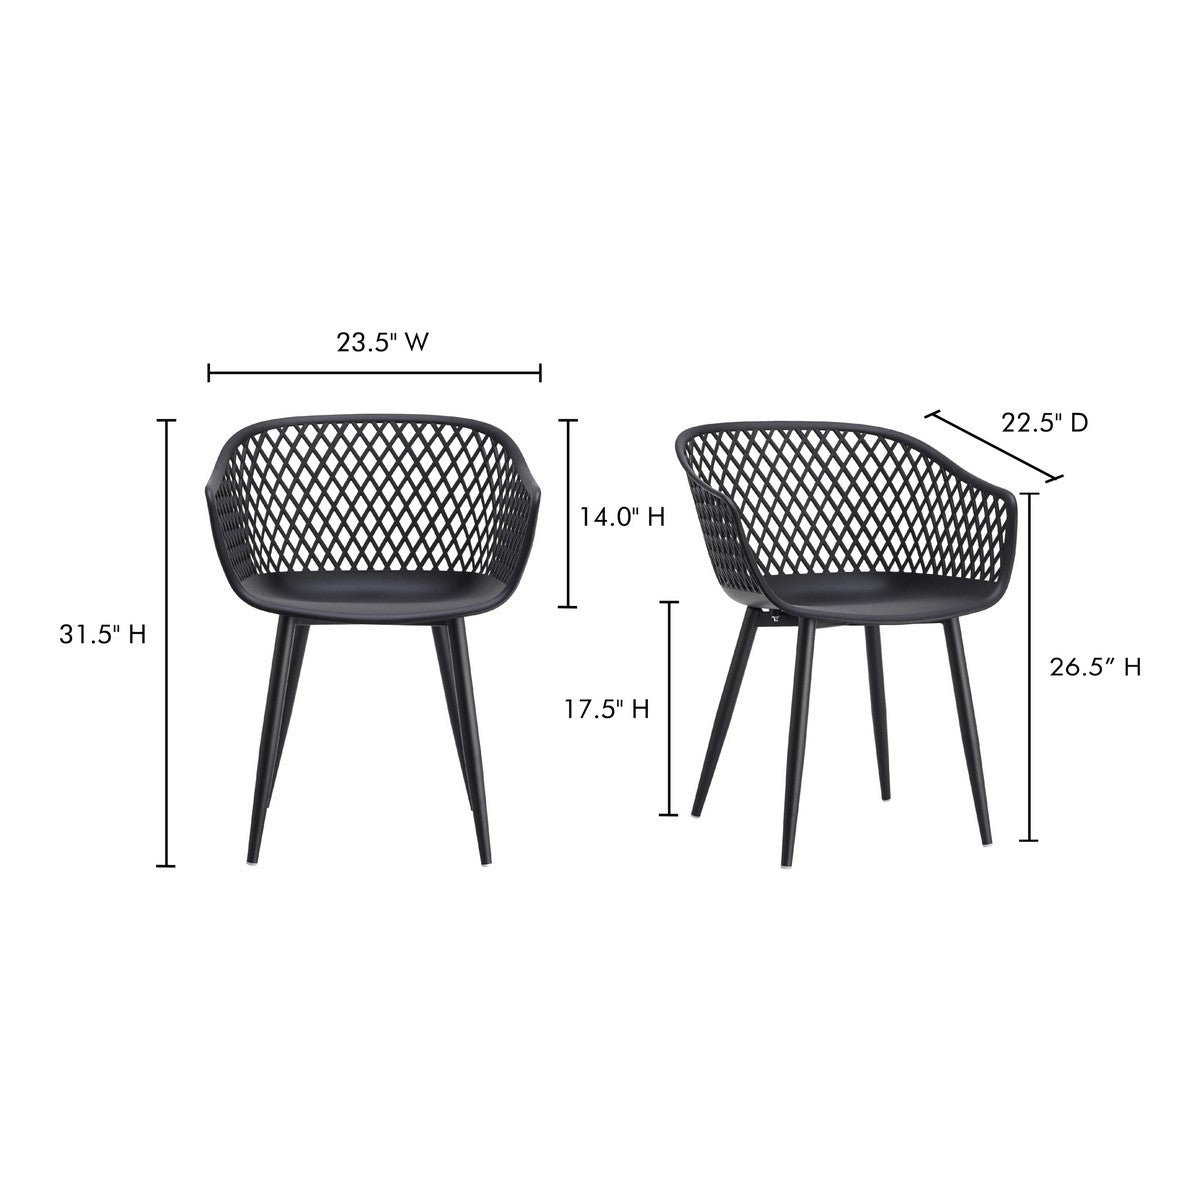 Moe's Home Collection Piazza Outdoor Chair Black-Set of Two - QX-1001-02